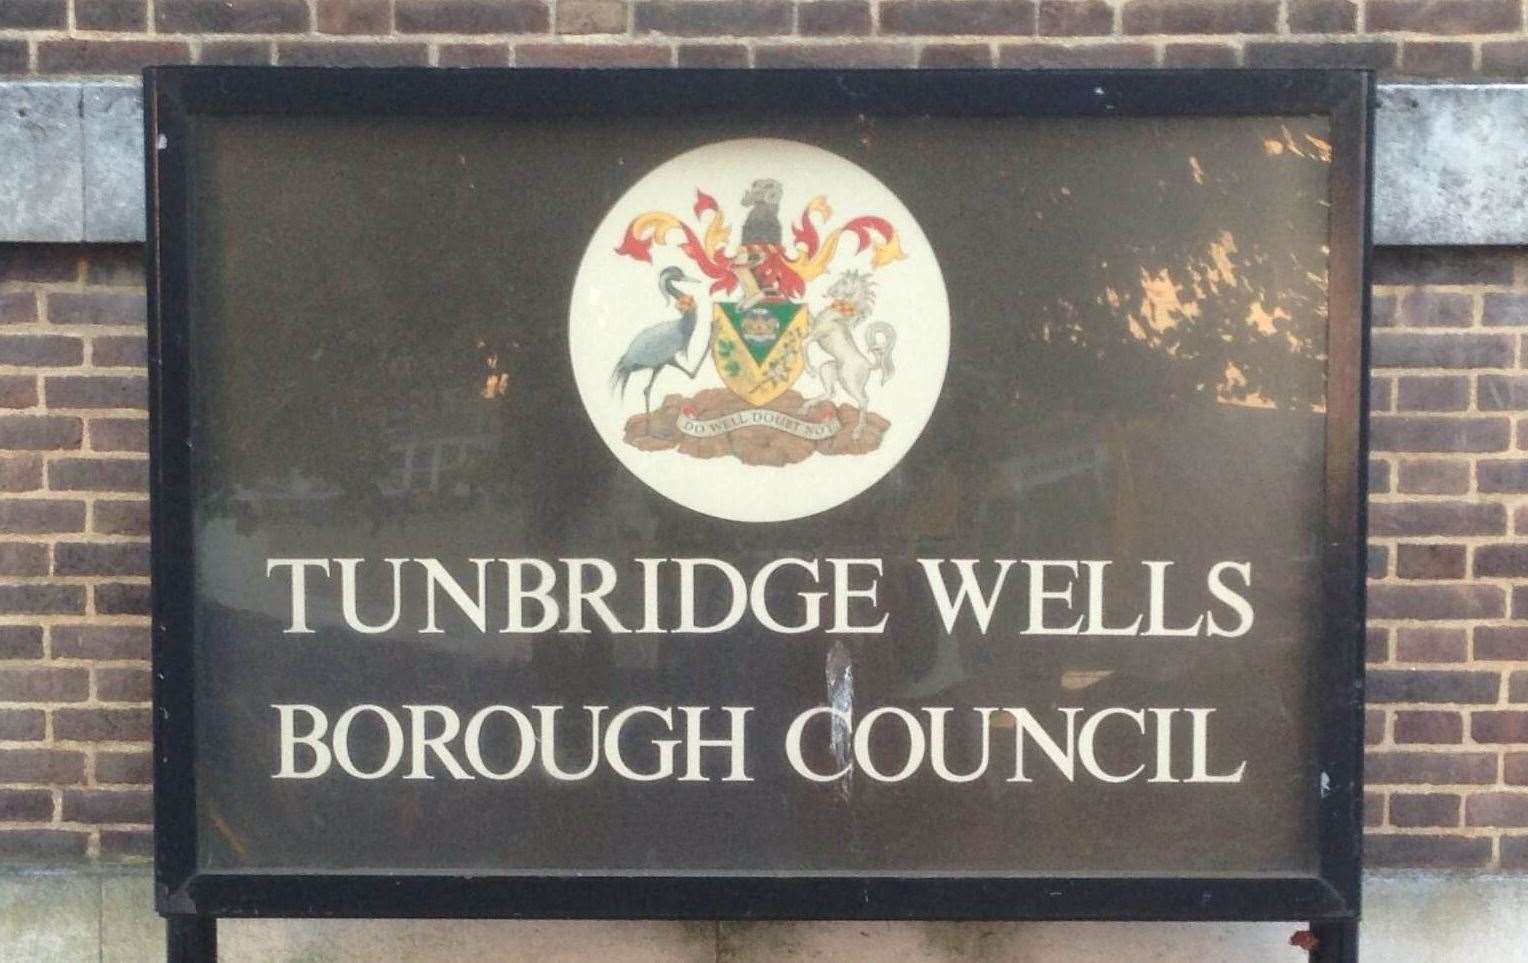 Tunbridge Wells Borough Council have resorted to raising car parking prices to cut costs